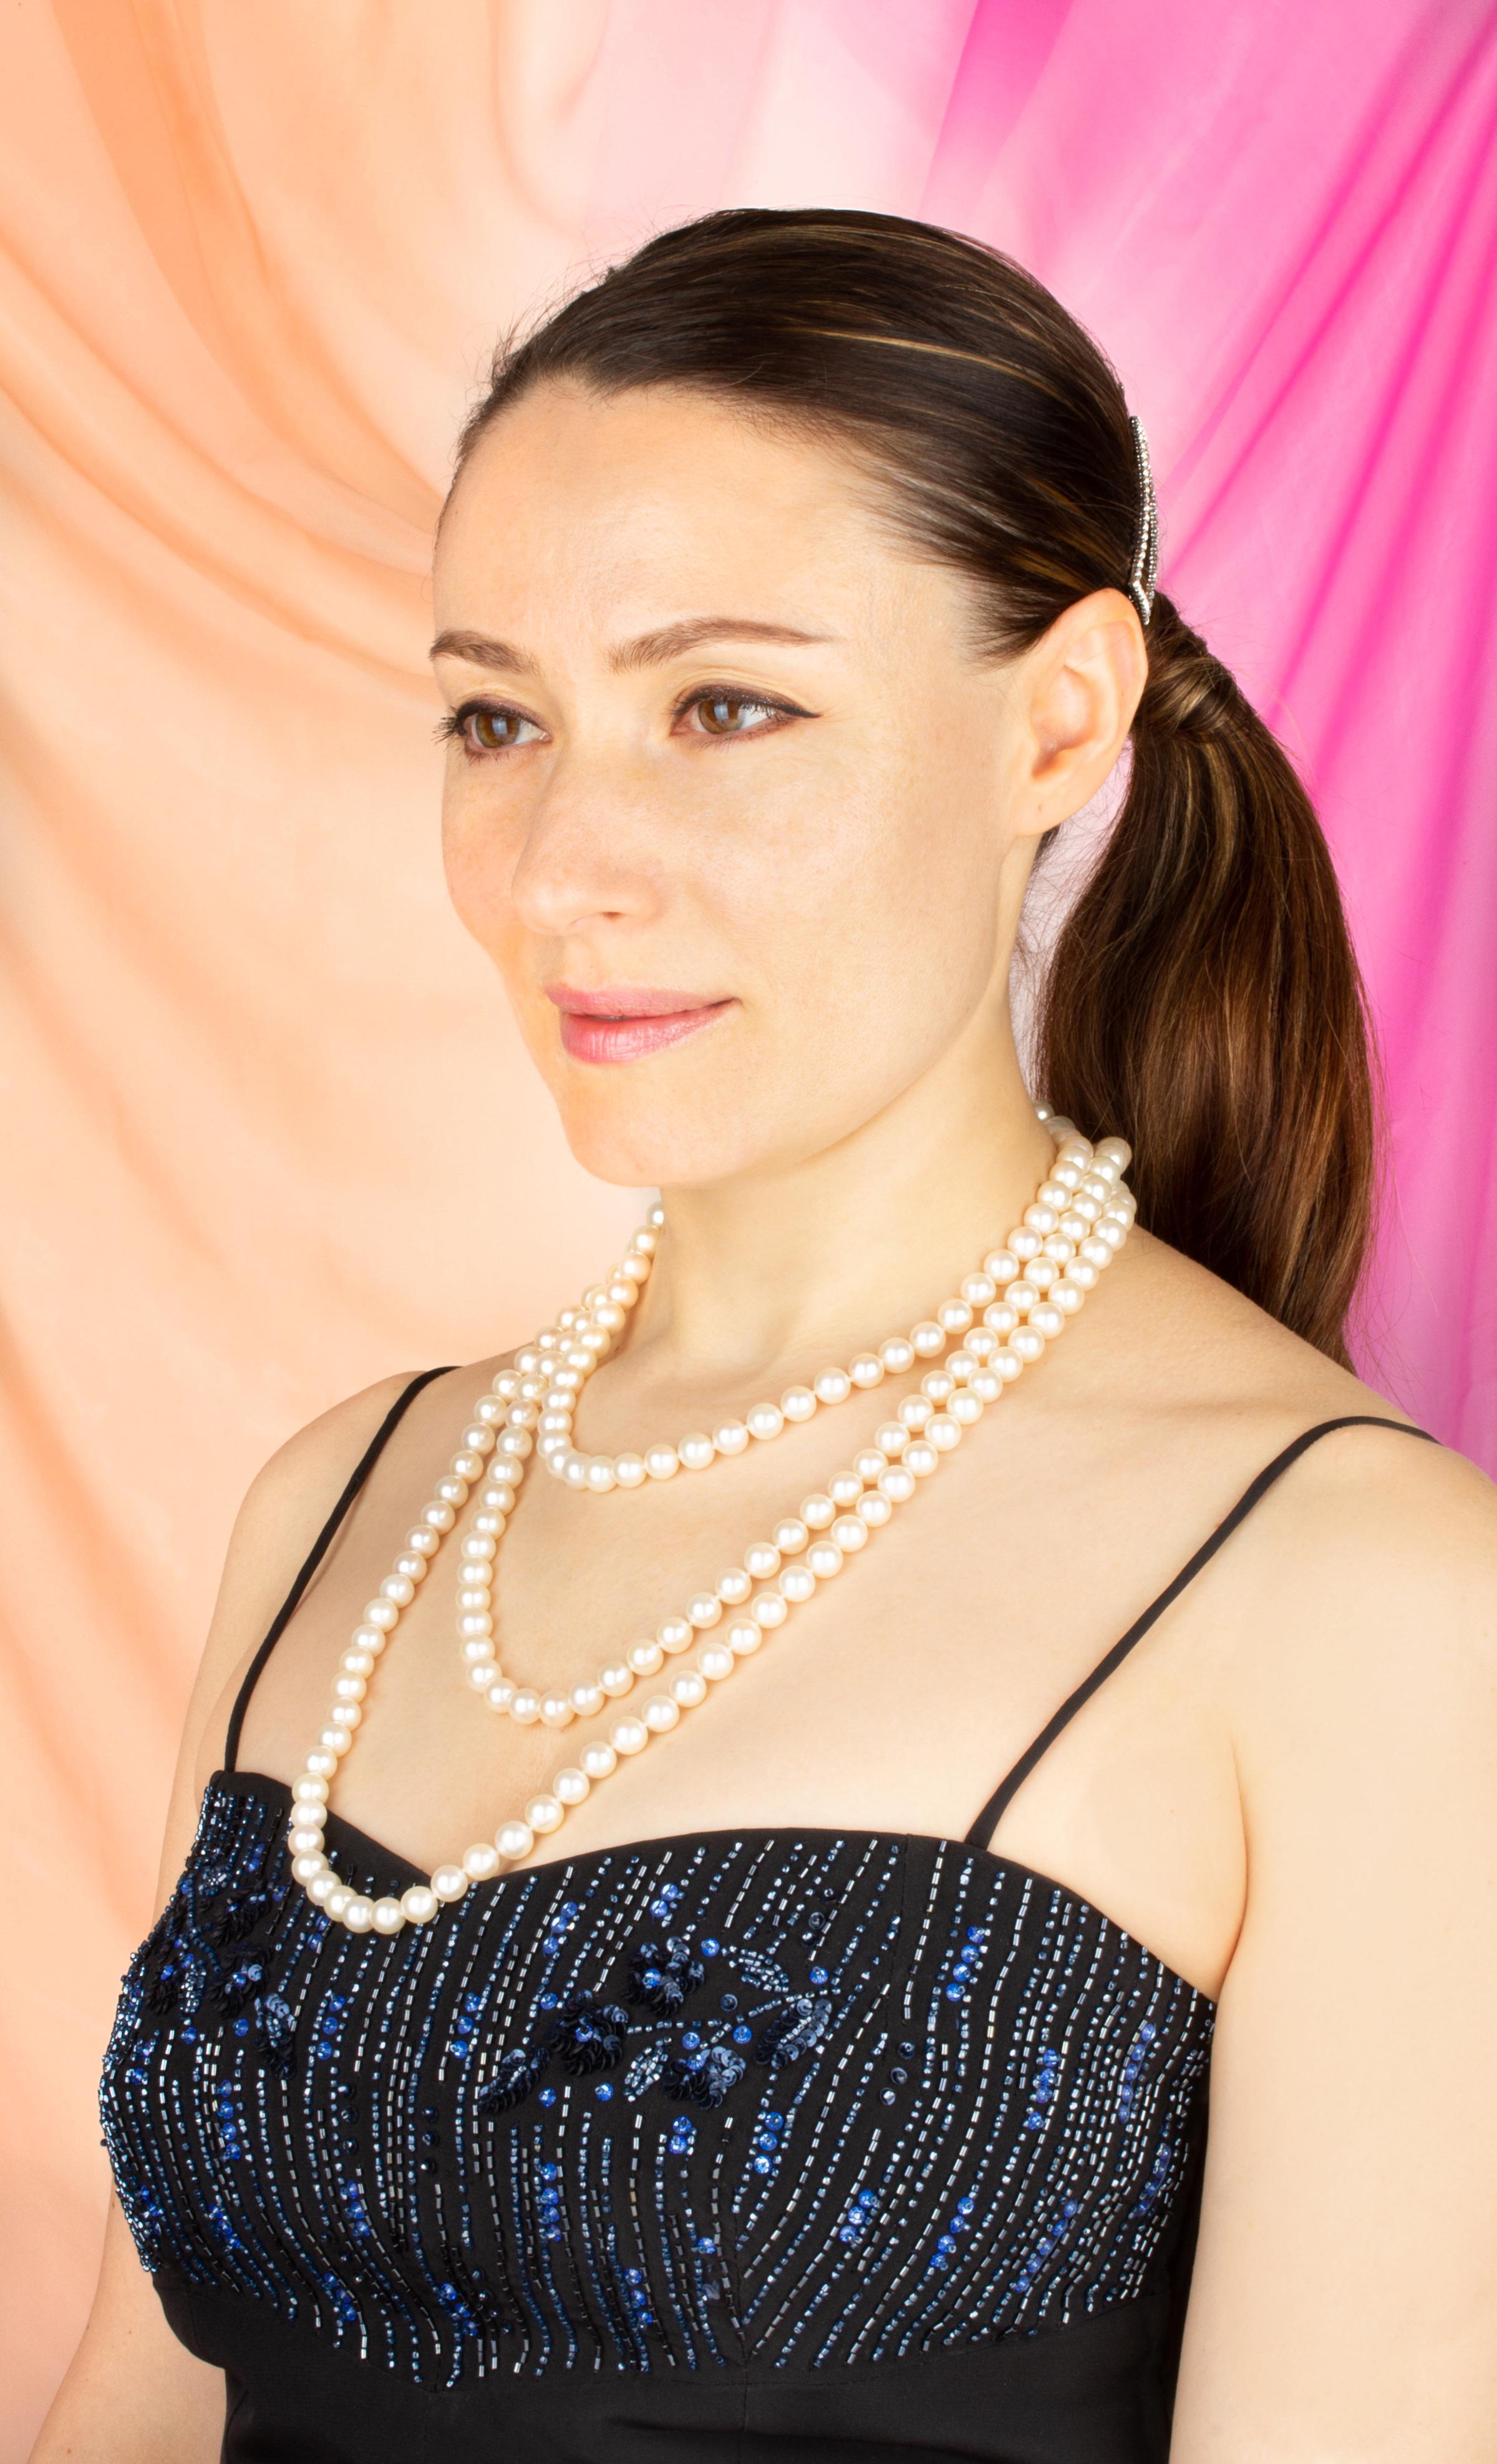 The 66” Japanese Akoya pearl necklace consists of 189 round pearls (Pinctada Fucata) of 8.5/9mm diameter. The pearls display a lovely nacre, lustre, and iridescence. The necklace is held together by a handmade 18 carat white gold clasp decorated